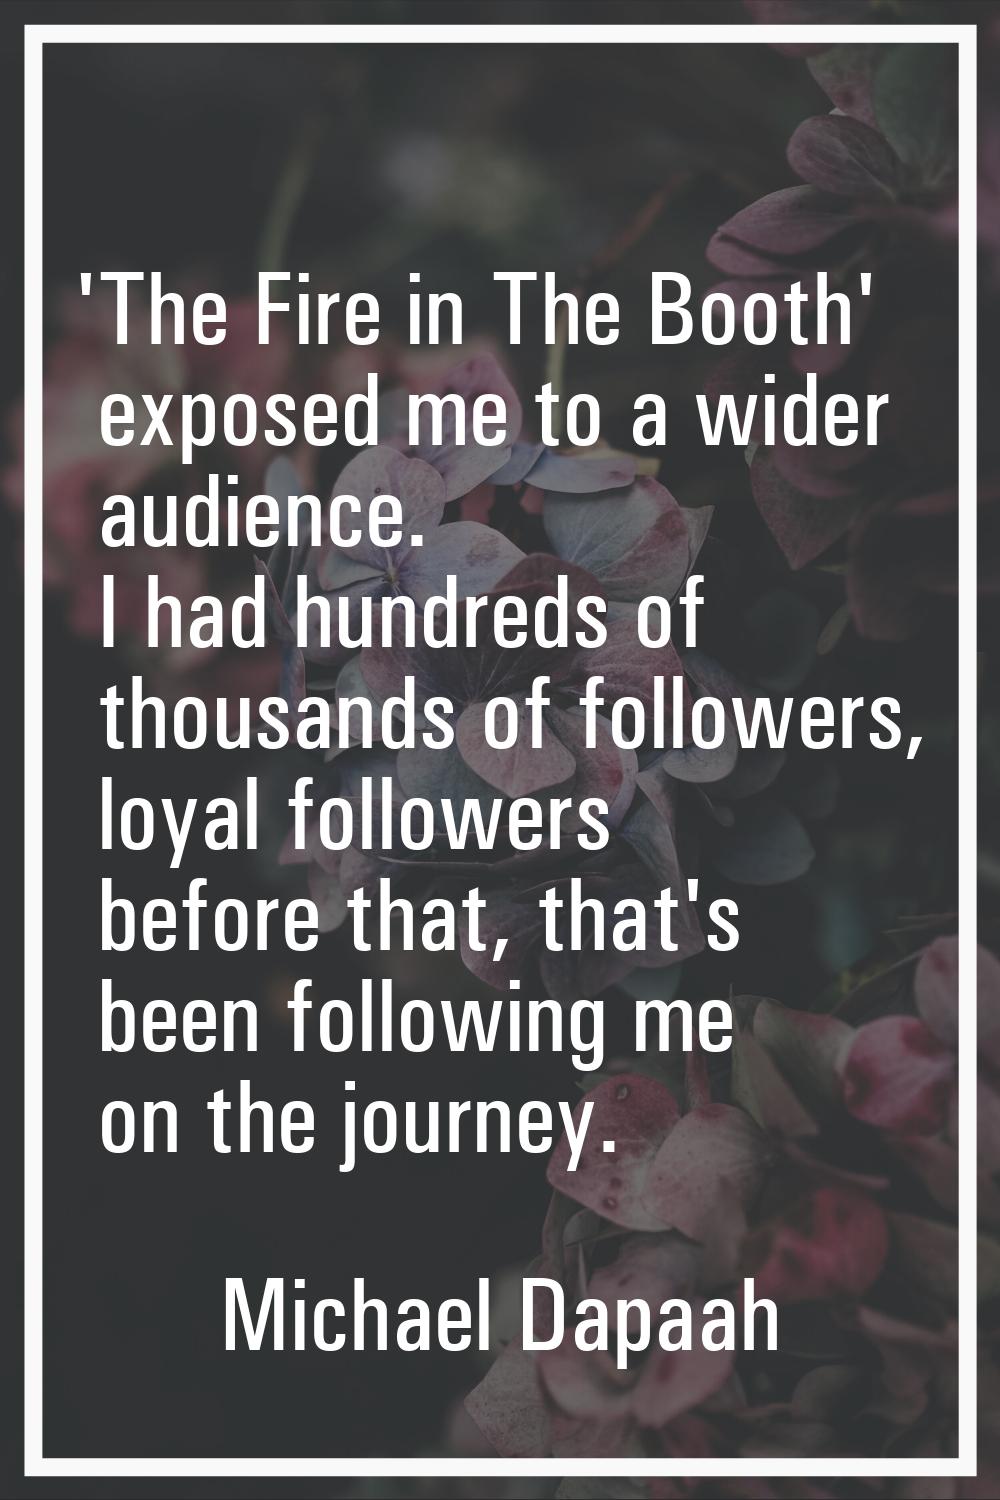 'The Fire in The Booth' exposed me to a wider audience. I had hundreds of thousands of followers, l